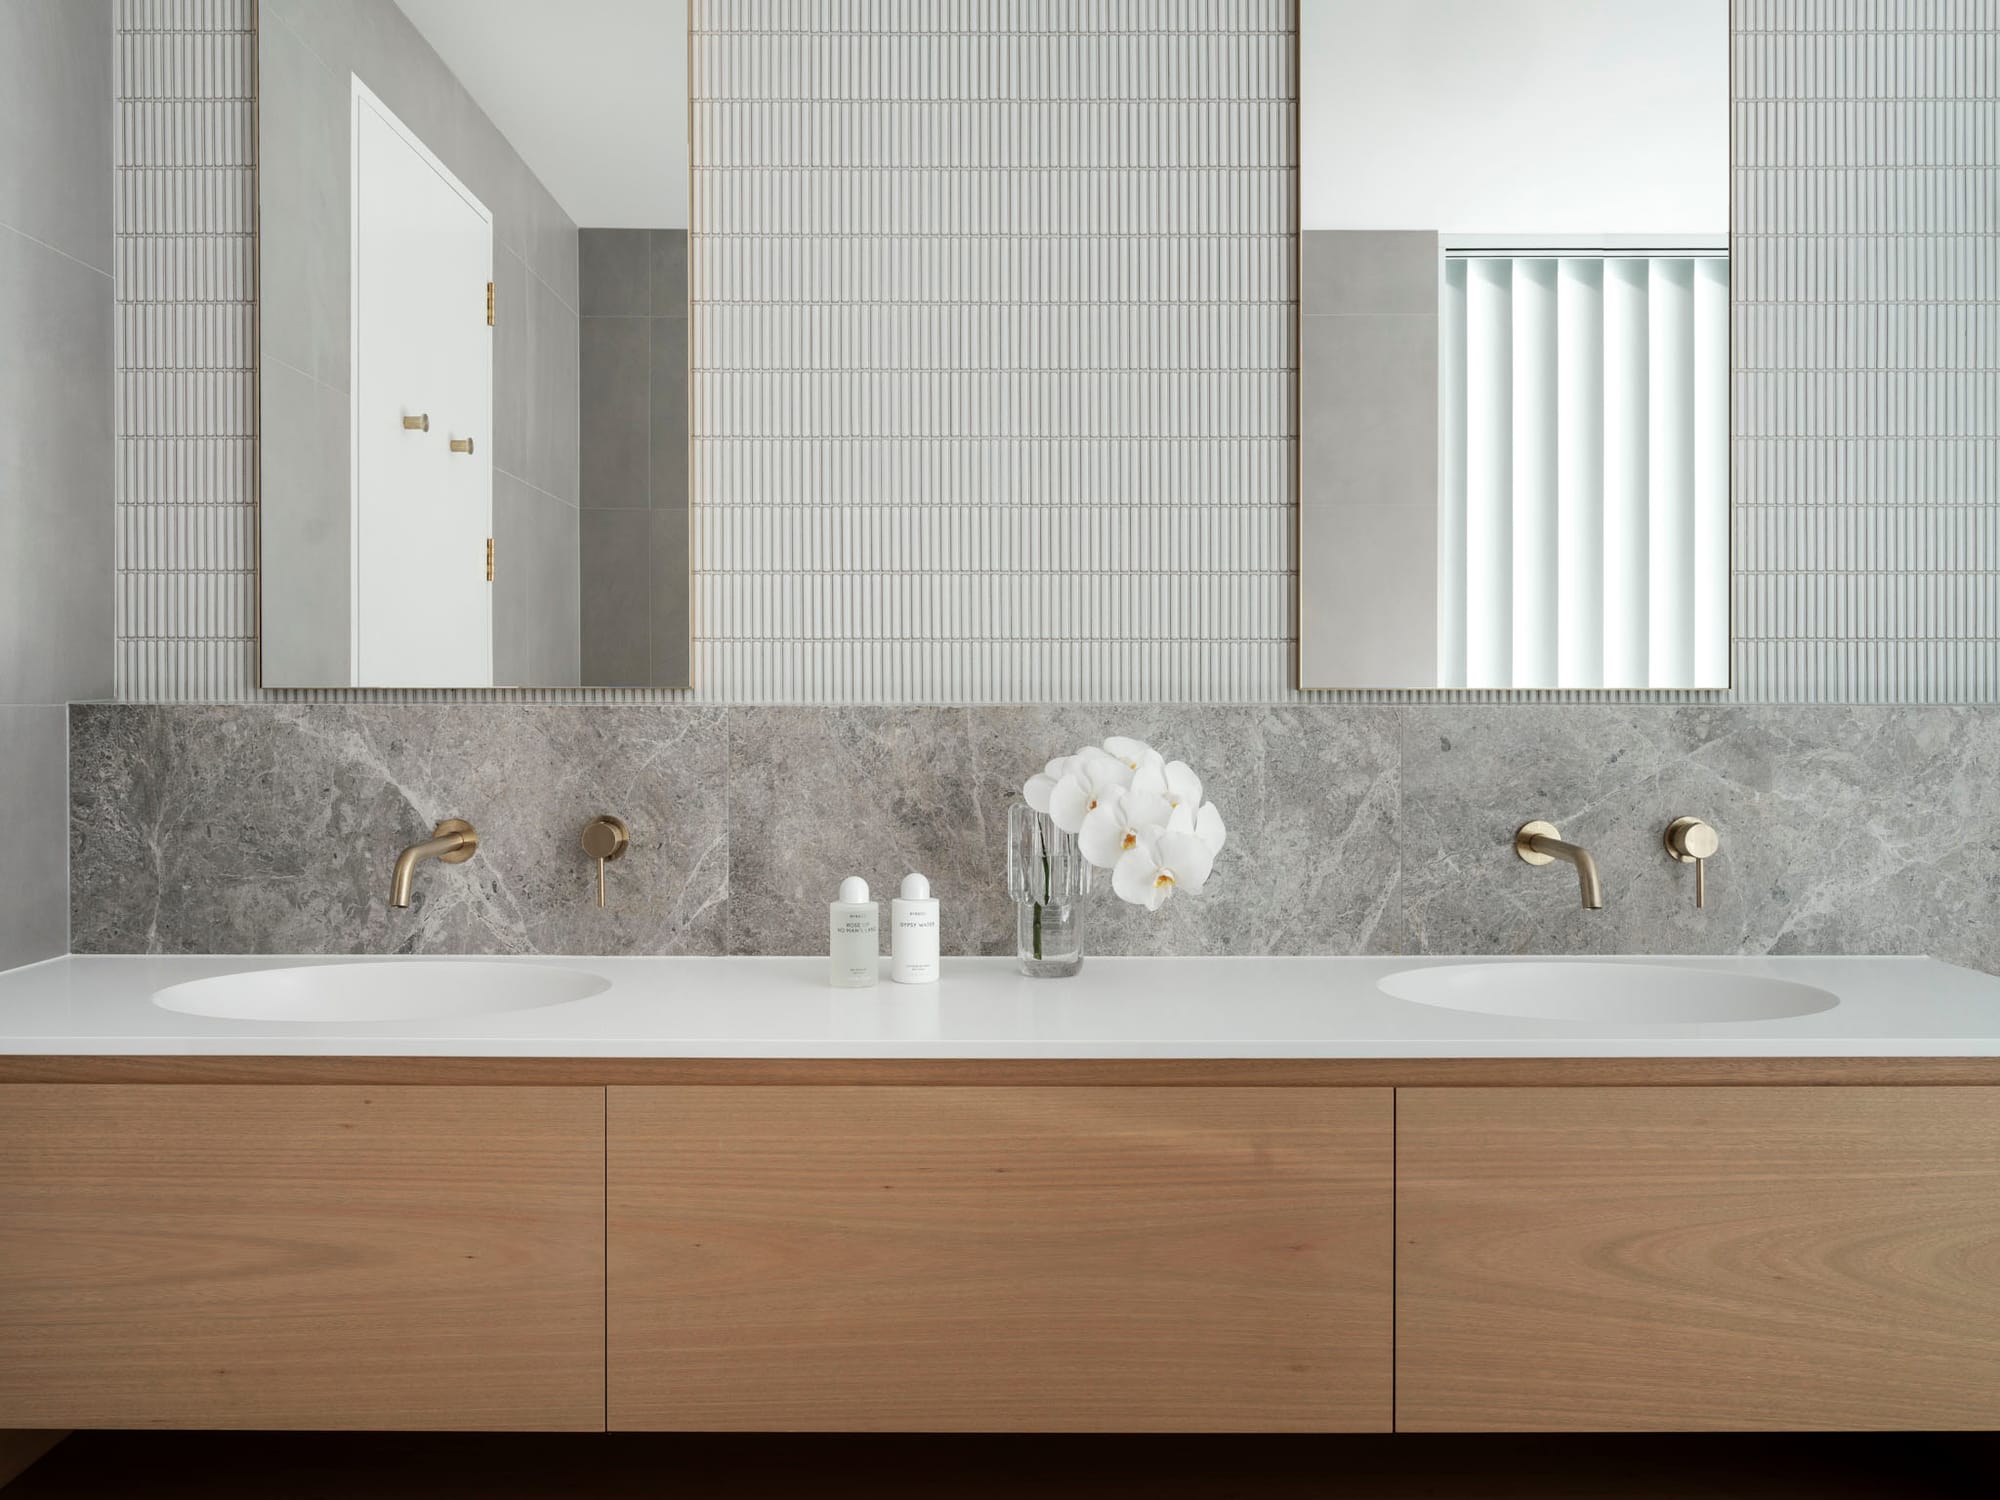 Kasa Byron Bay. Photography by Tom Ferguson. Timber bathroom vanity with stone splashback and tiled wall. Double gold framed mirrors above double white sinks. 